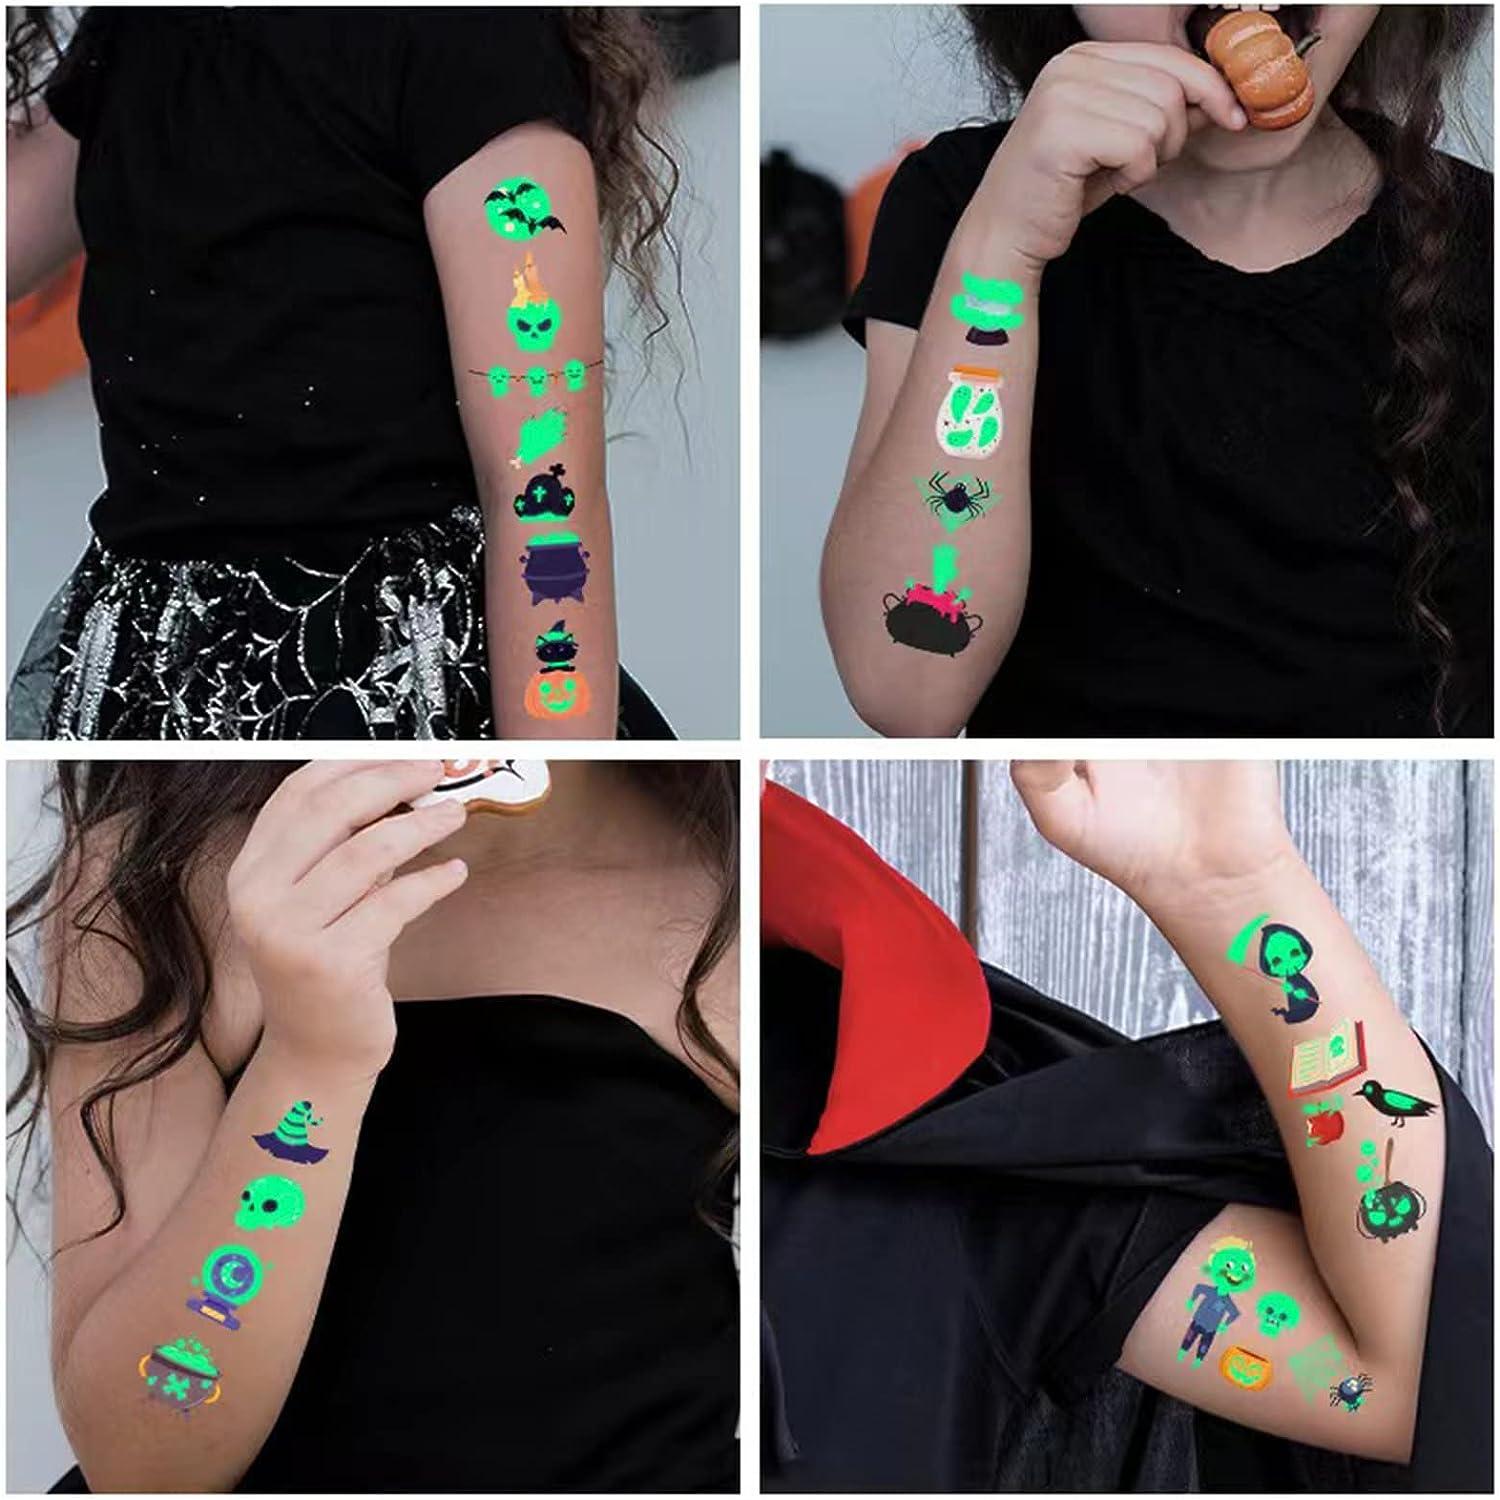 Luminous Temporary Tattoos for Kids Party Supplies 120 Styles Glow in the  Dark Decorations Birthday Party Favors Supplies Gifts Fake Tattoos 10  Sheets 2-Luminous Halloween Sticker-10Sheets